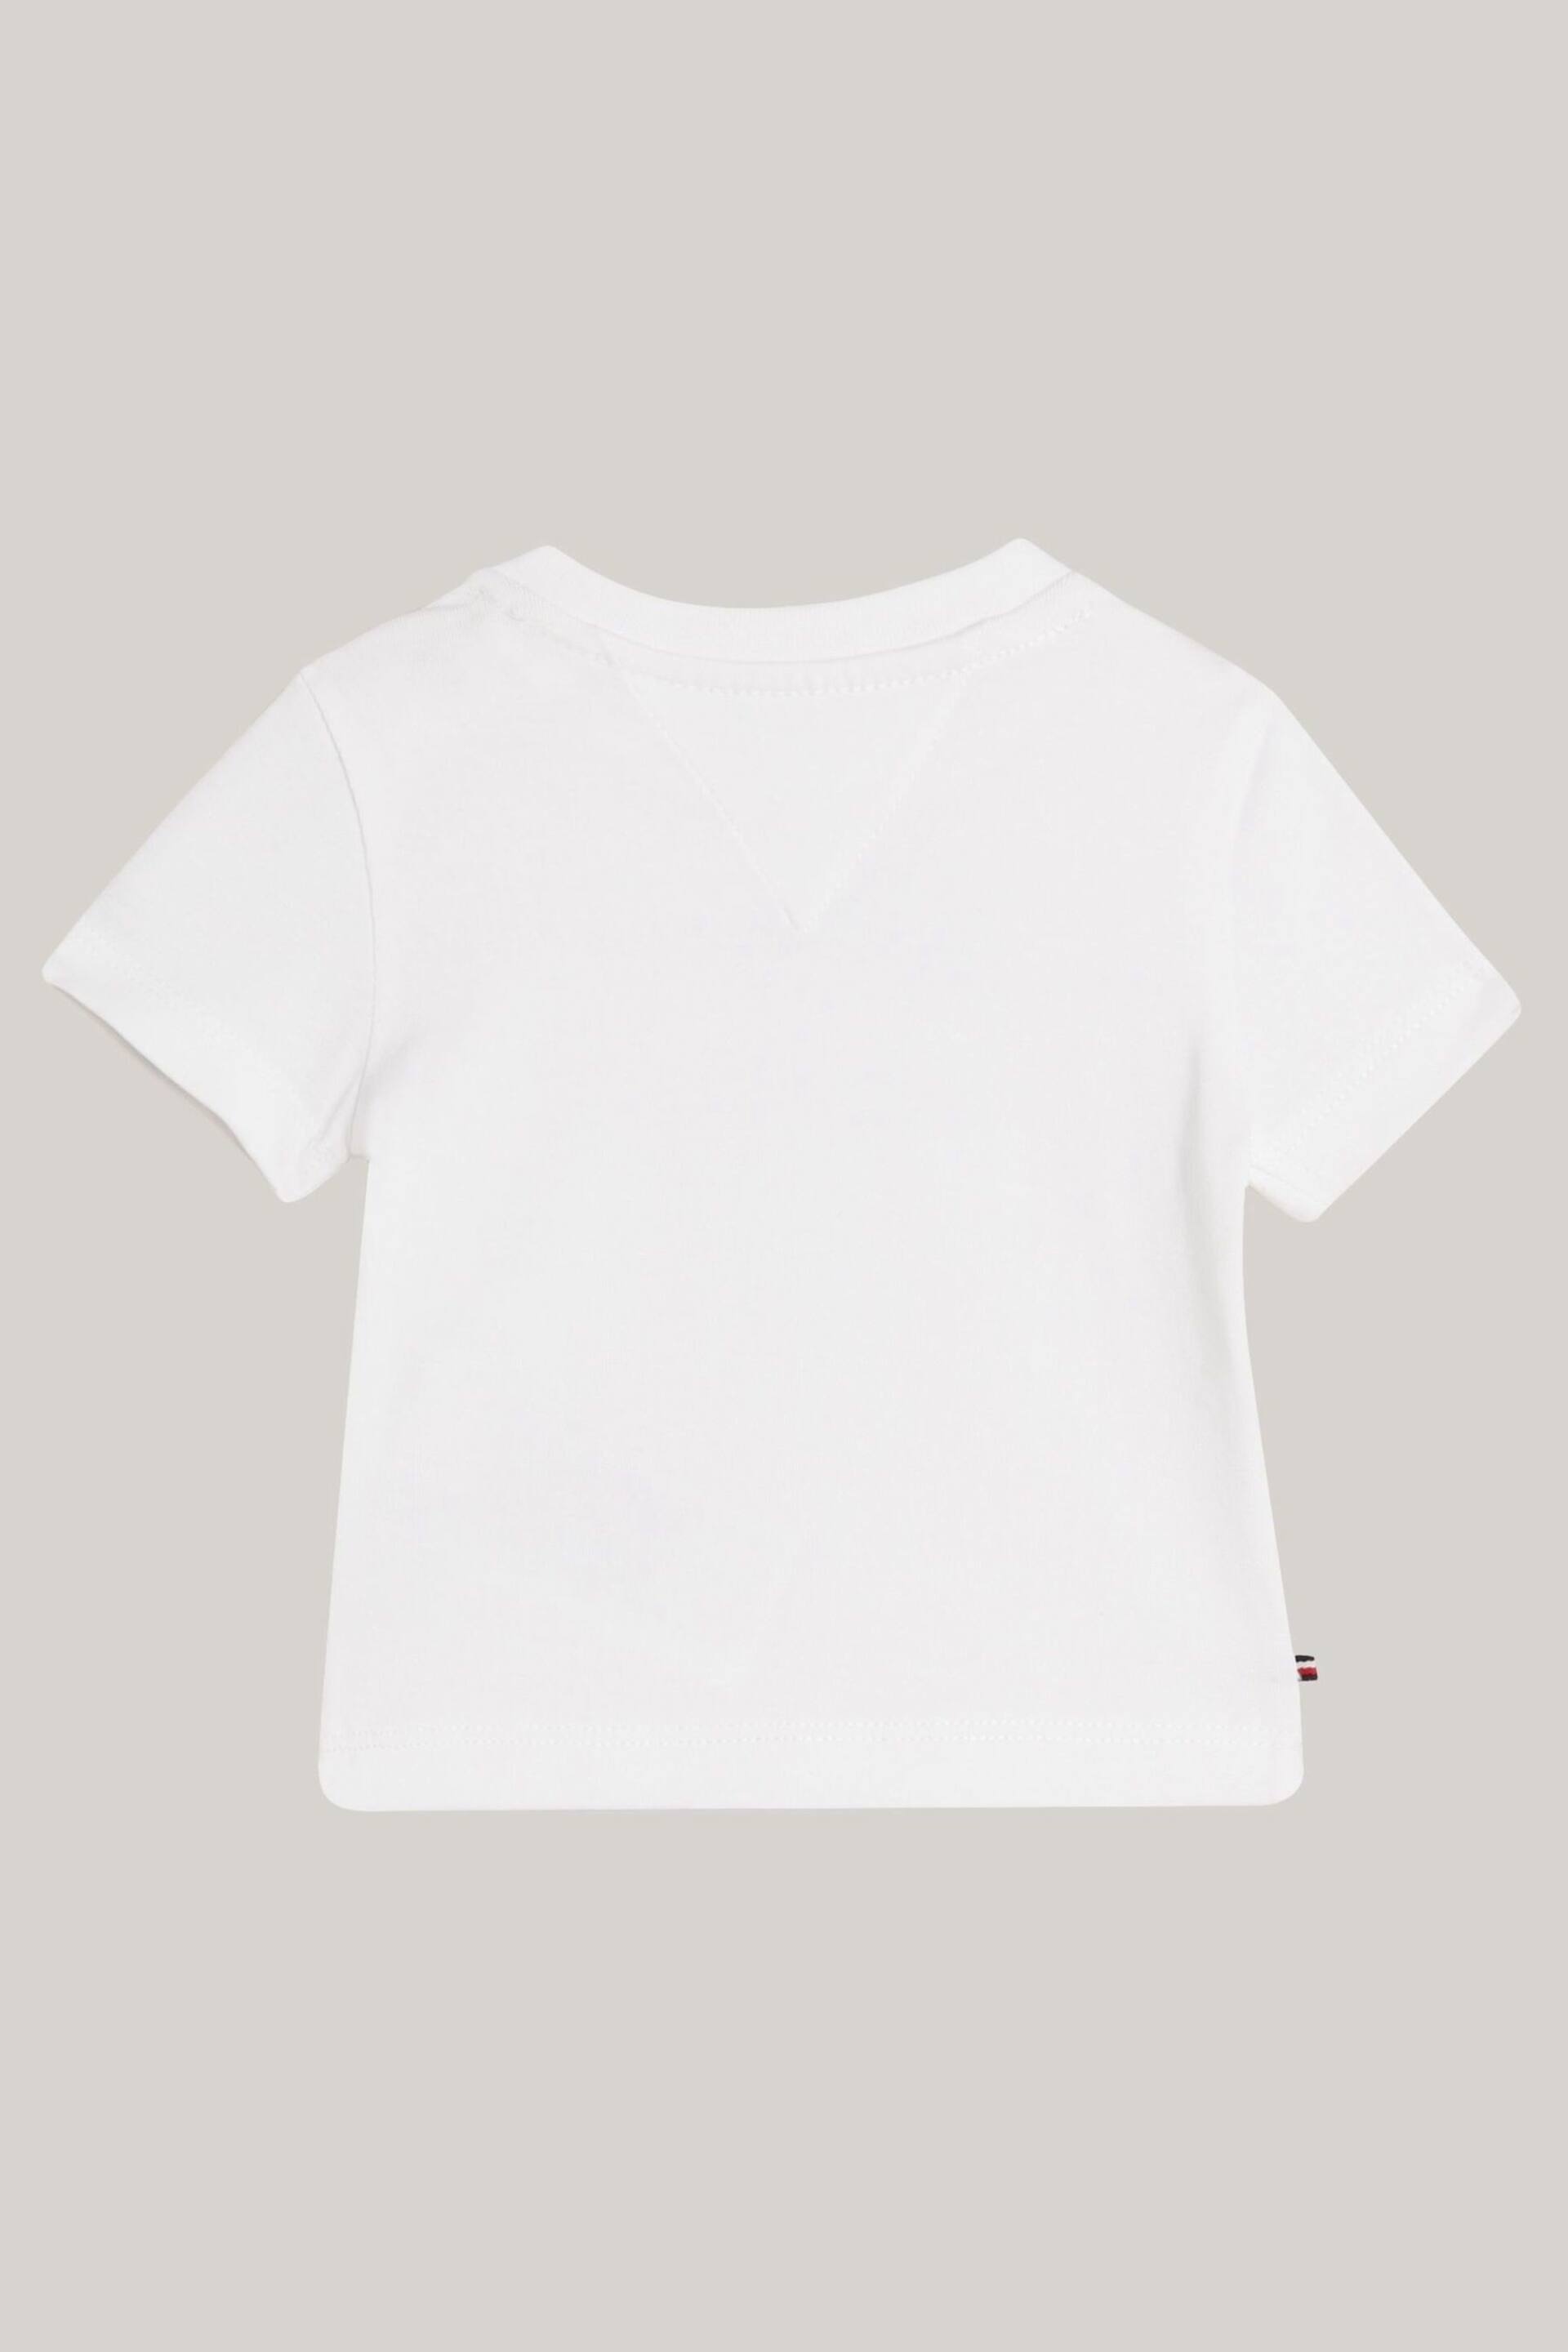 Tommy Hilfiger Baby Logo White T-Shirt - Image 2 of 3